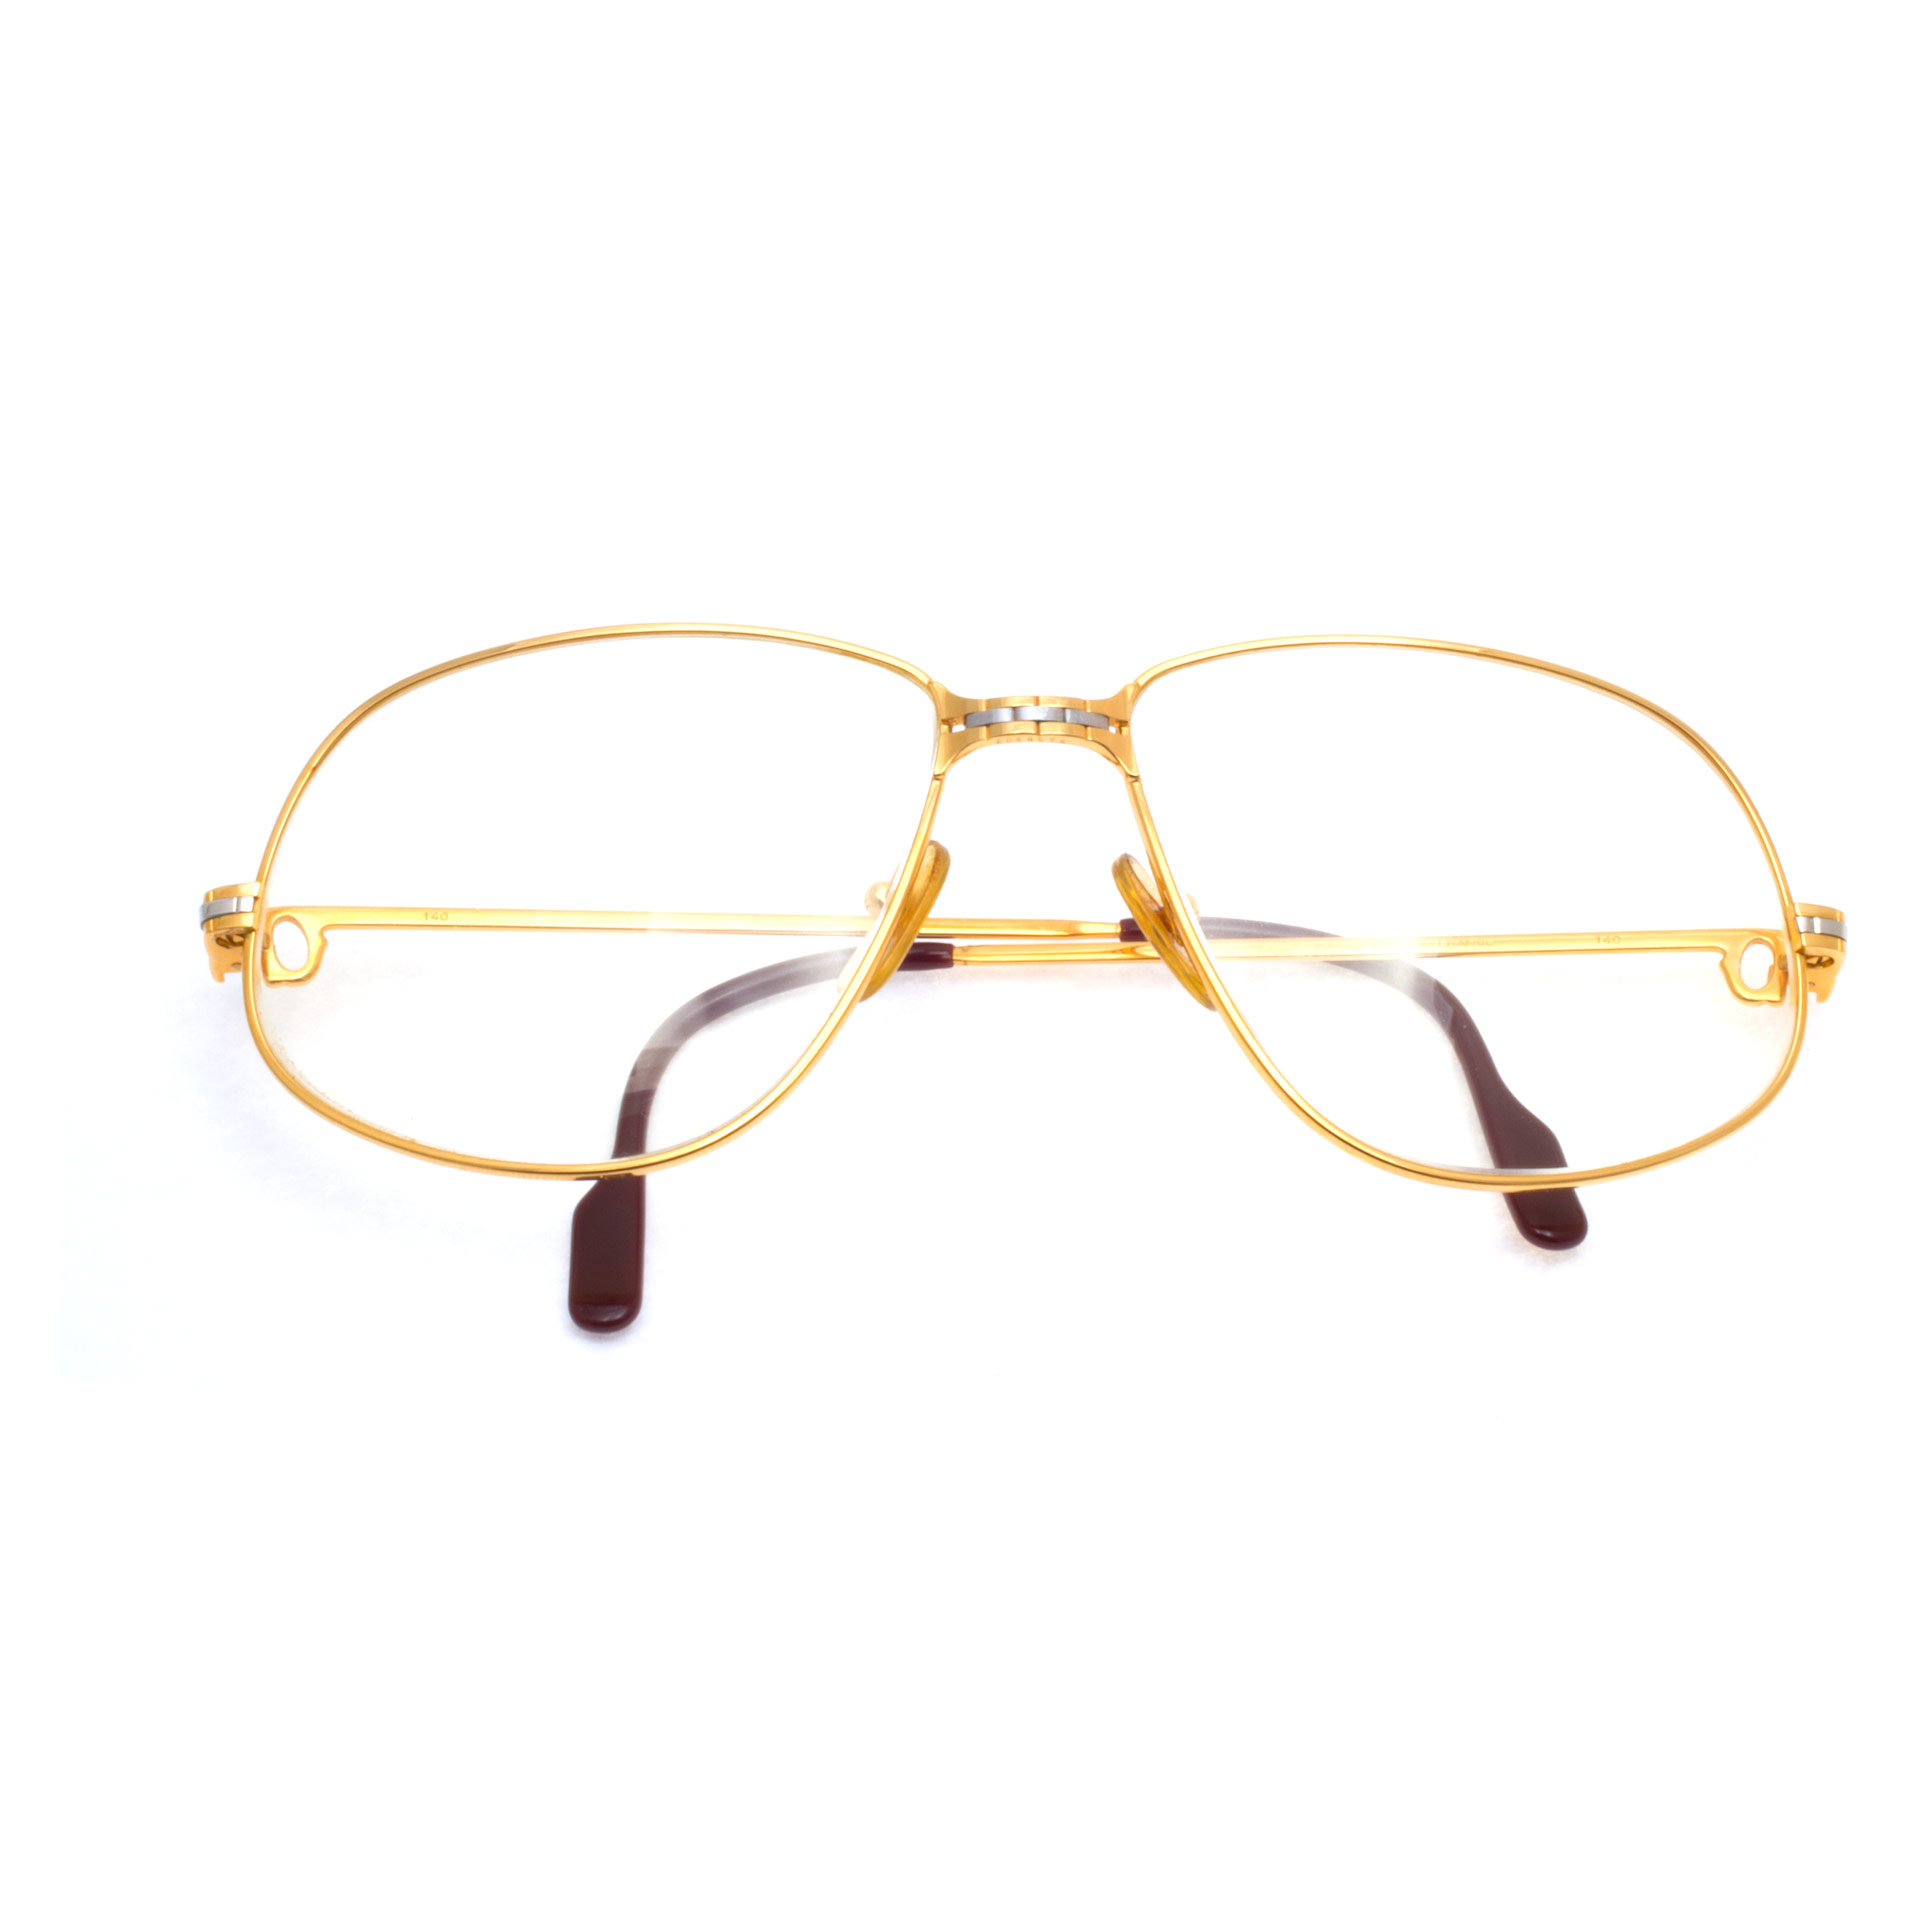 Signed "1988 Cartier" Panthere glasses in gold plated. image 1